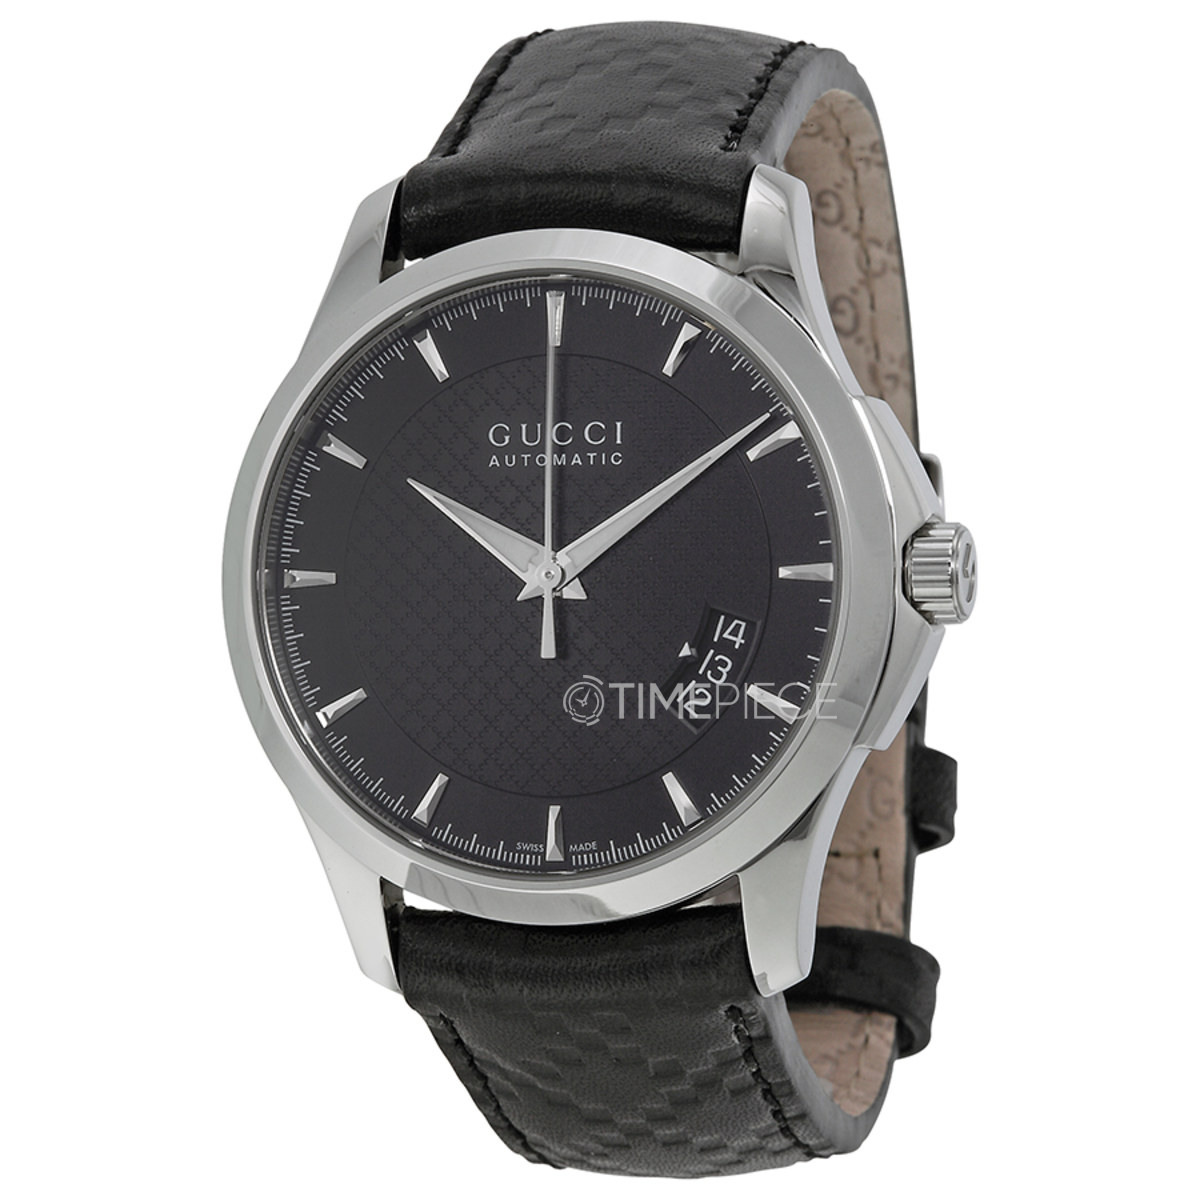 voldoende Joseph Banks Bewust worden Gucci YA126413 G-Timeless Mens Automatic Watch